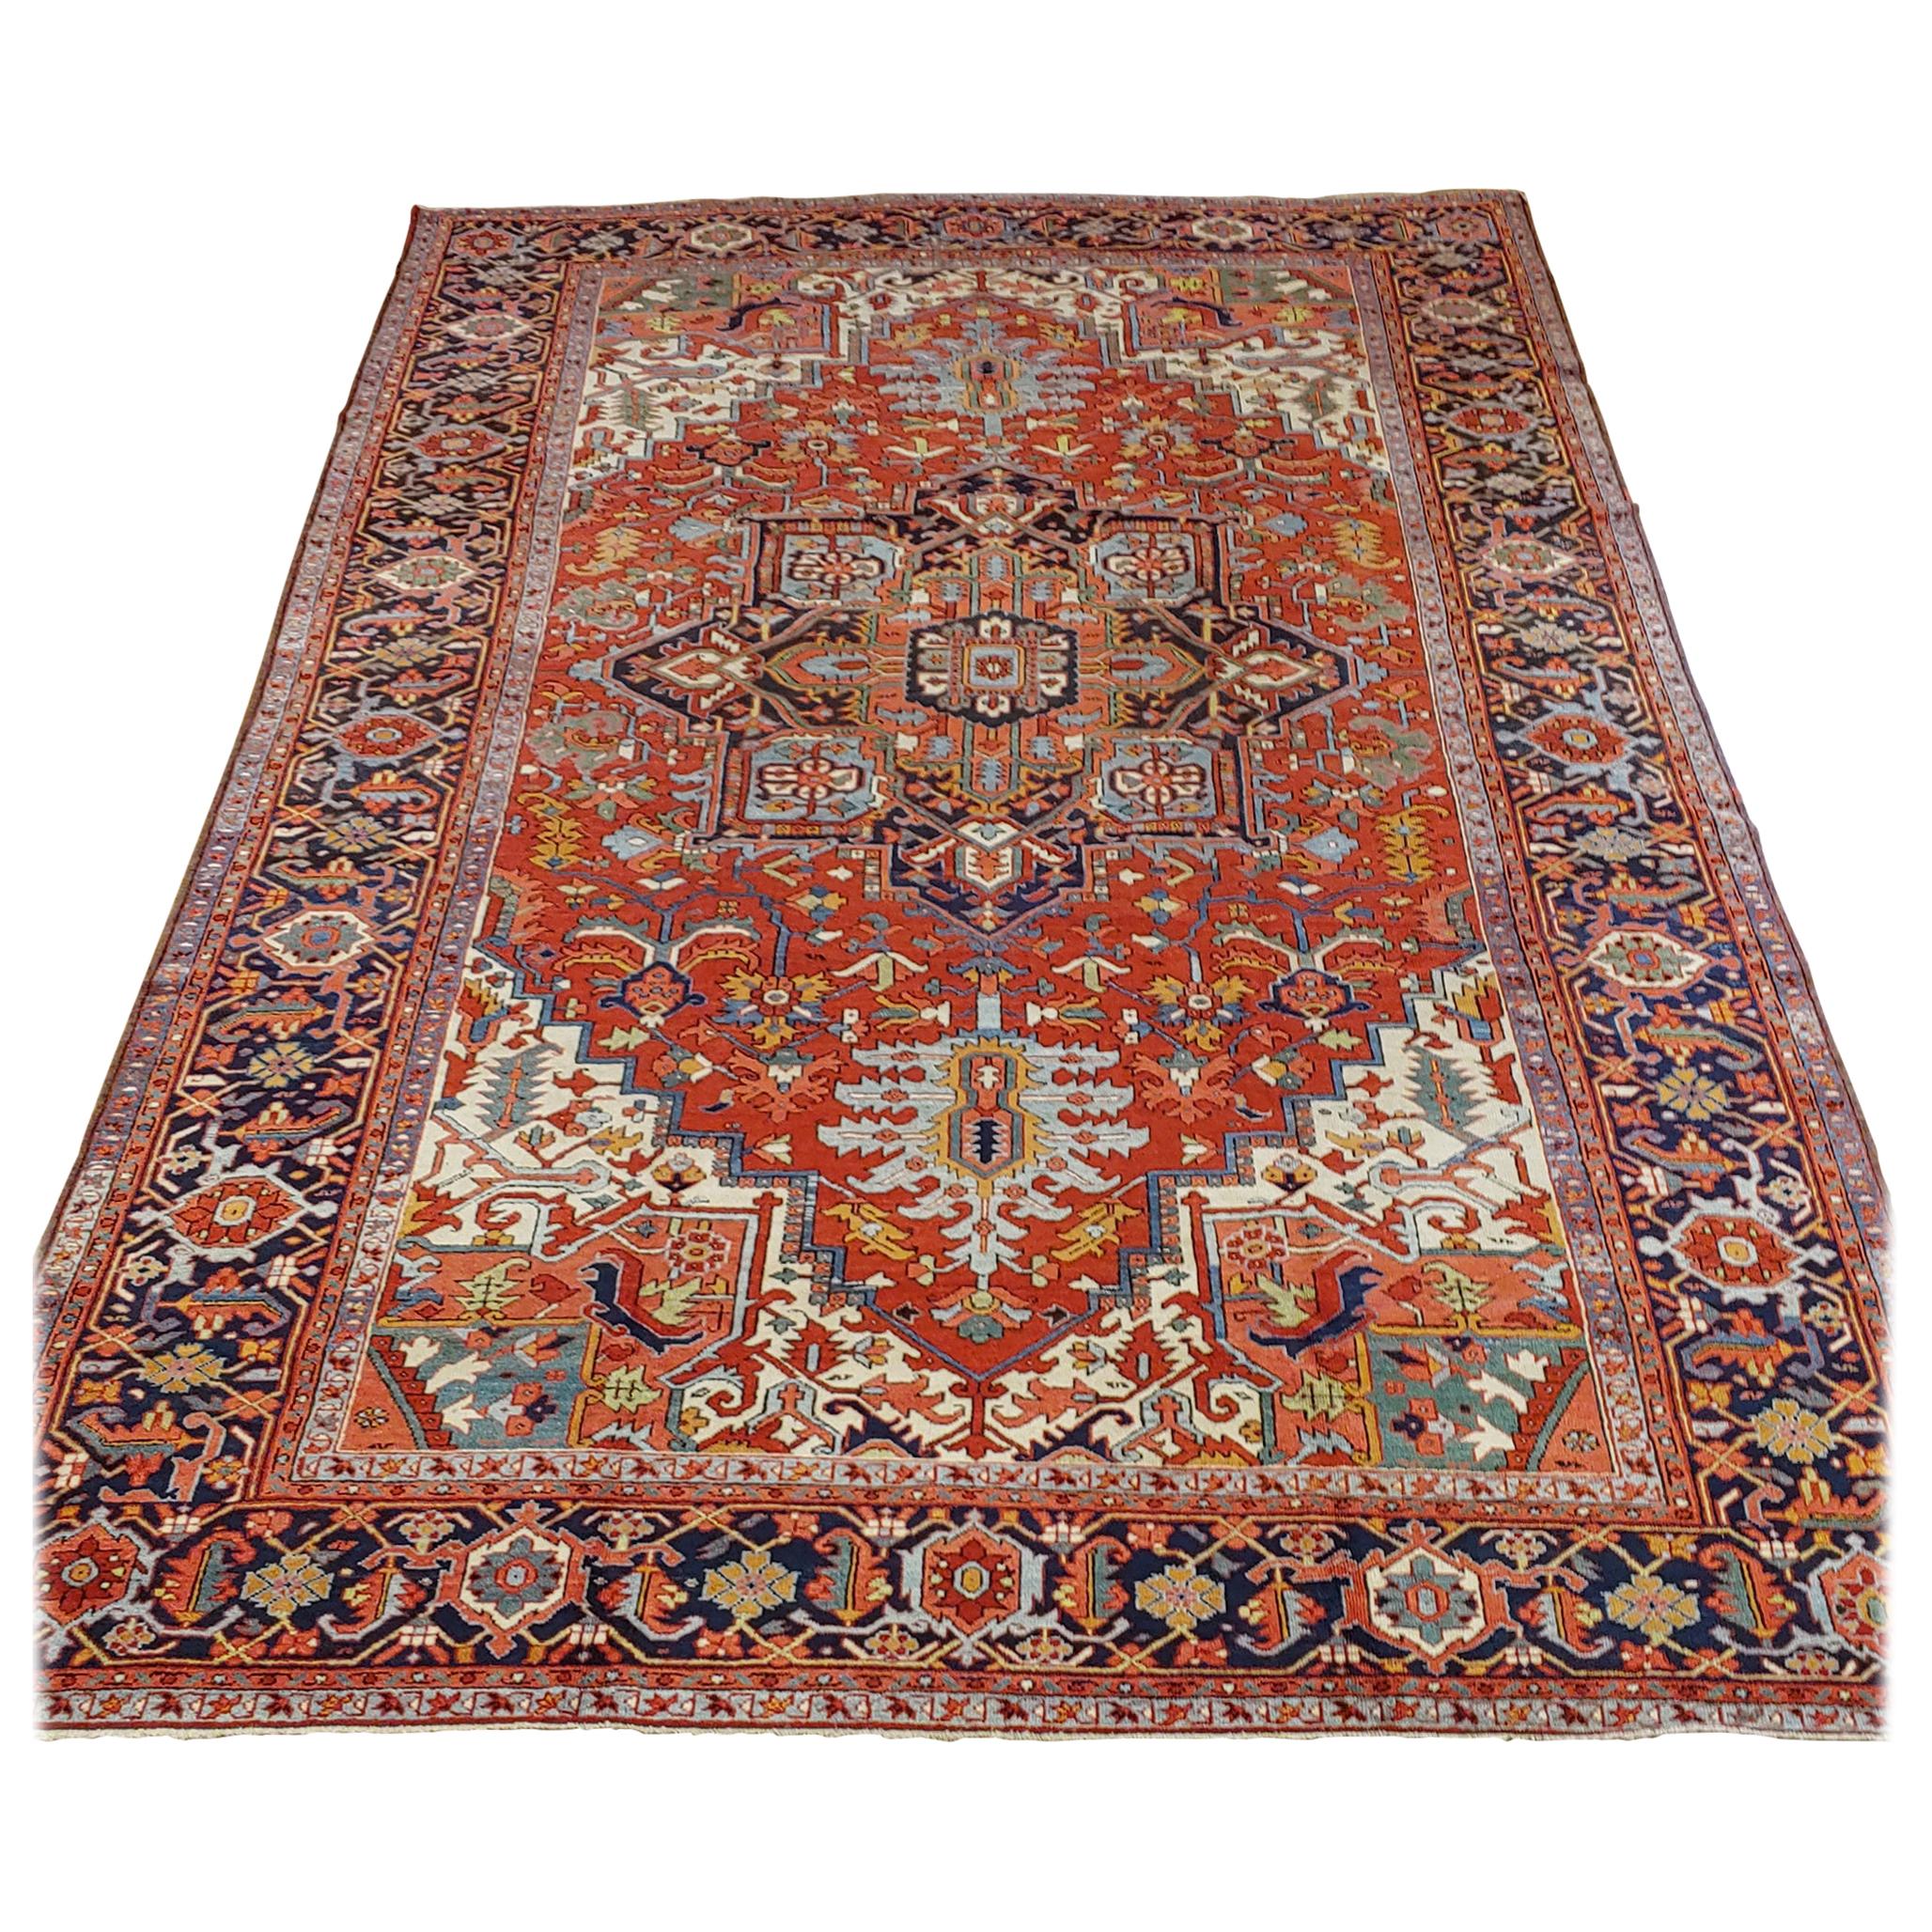 This is a gracious and beautiful Persian Heriz (though lots of dealers would call it a Serapi). The field is rust with ivory spandrels and a wonderful Herati motif border with navy background. The design also uses lots of light blue and a teal